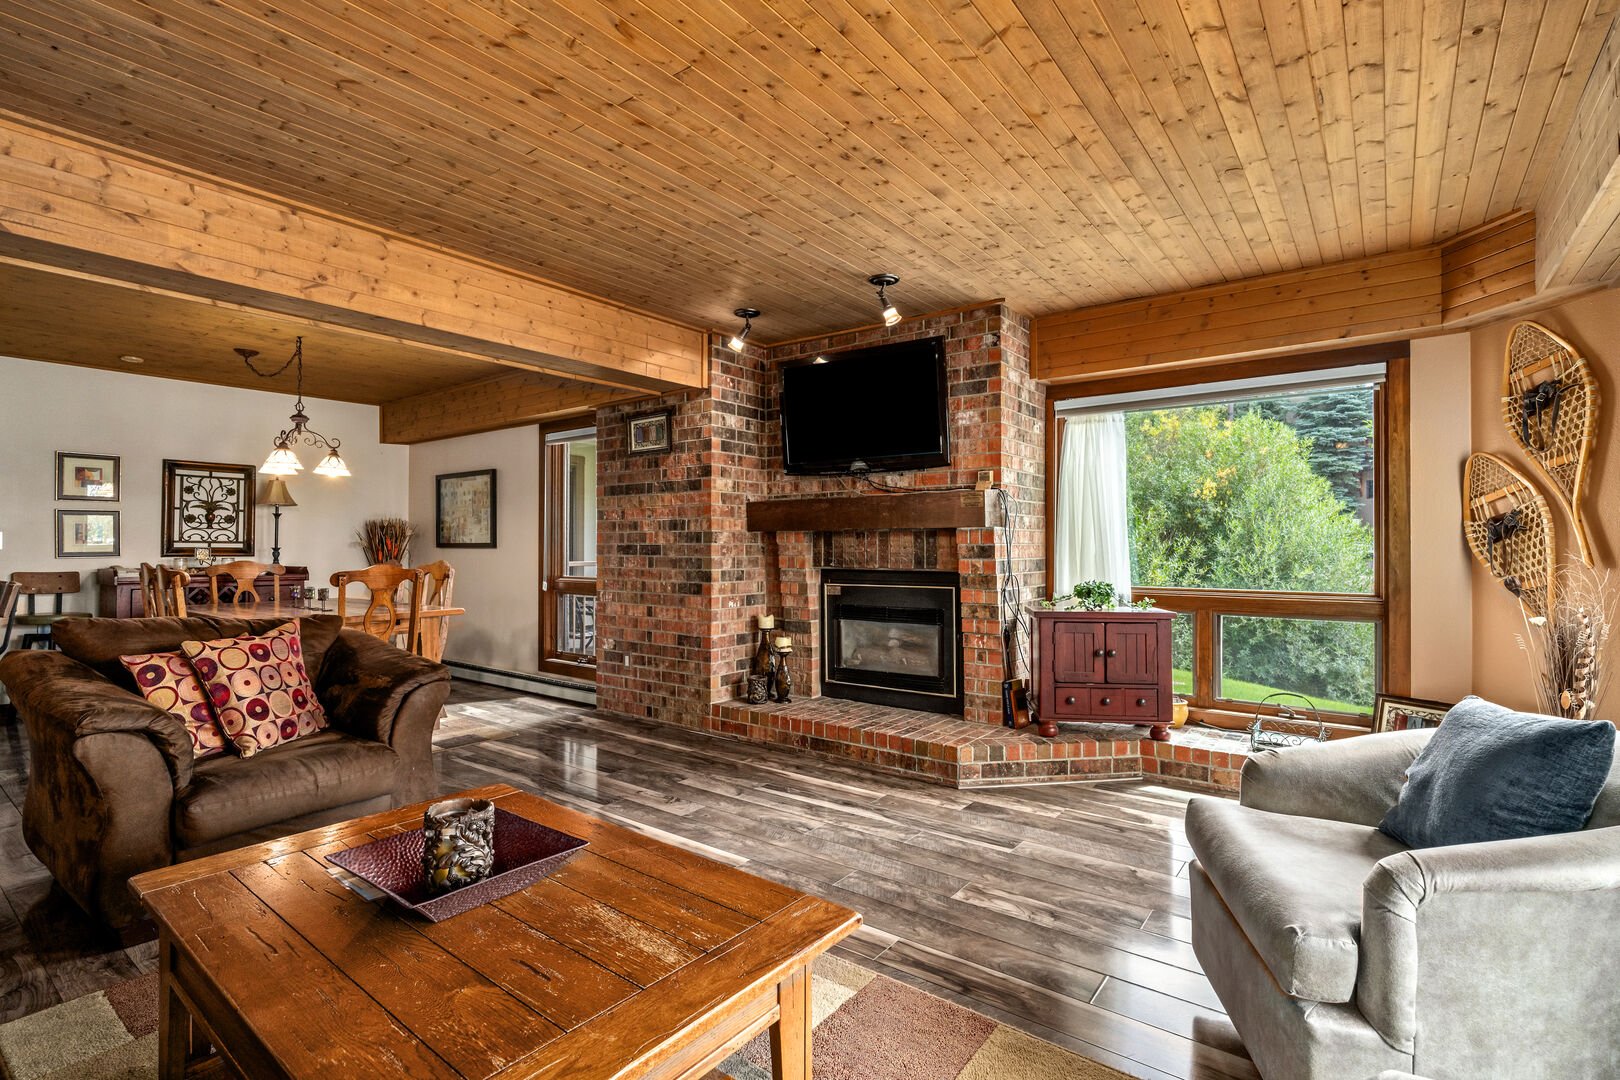 The living area incorporates exposed brick and natural wood, with a large TV, gas fireplace and the entrance to the deck.